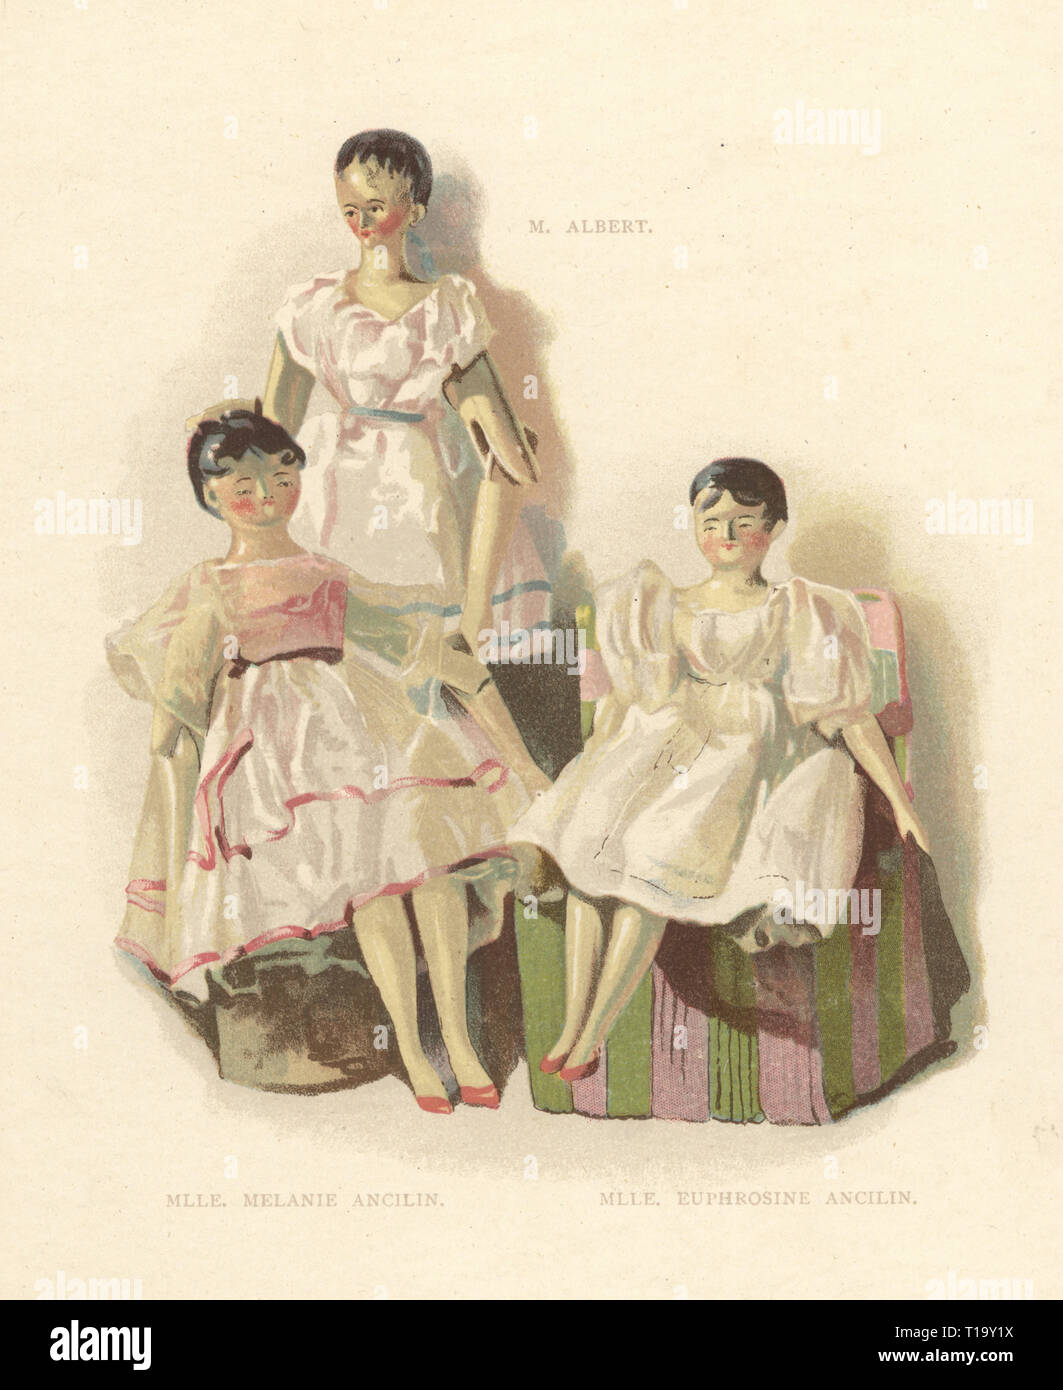 of King's Theatre ballet master M. Albert and ballerina sisters Mlle. Melanie and Mlle. Euphrosine Ancilin dressed by the young Princess Victoria. Color plate after an illustration by Alan Wright from